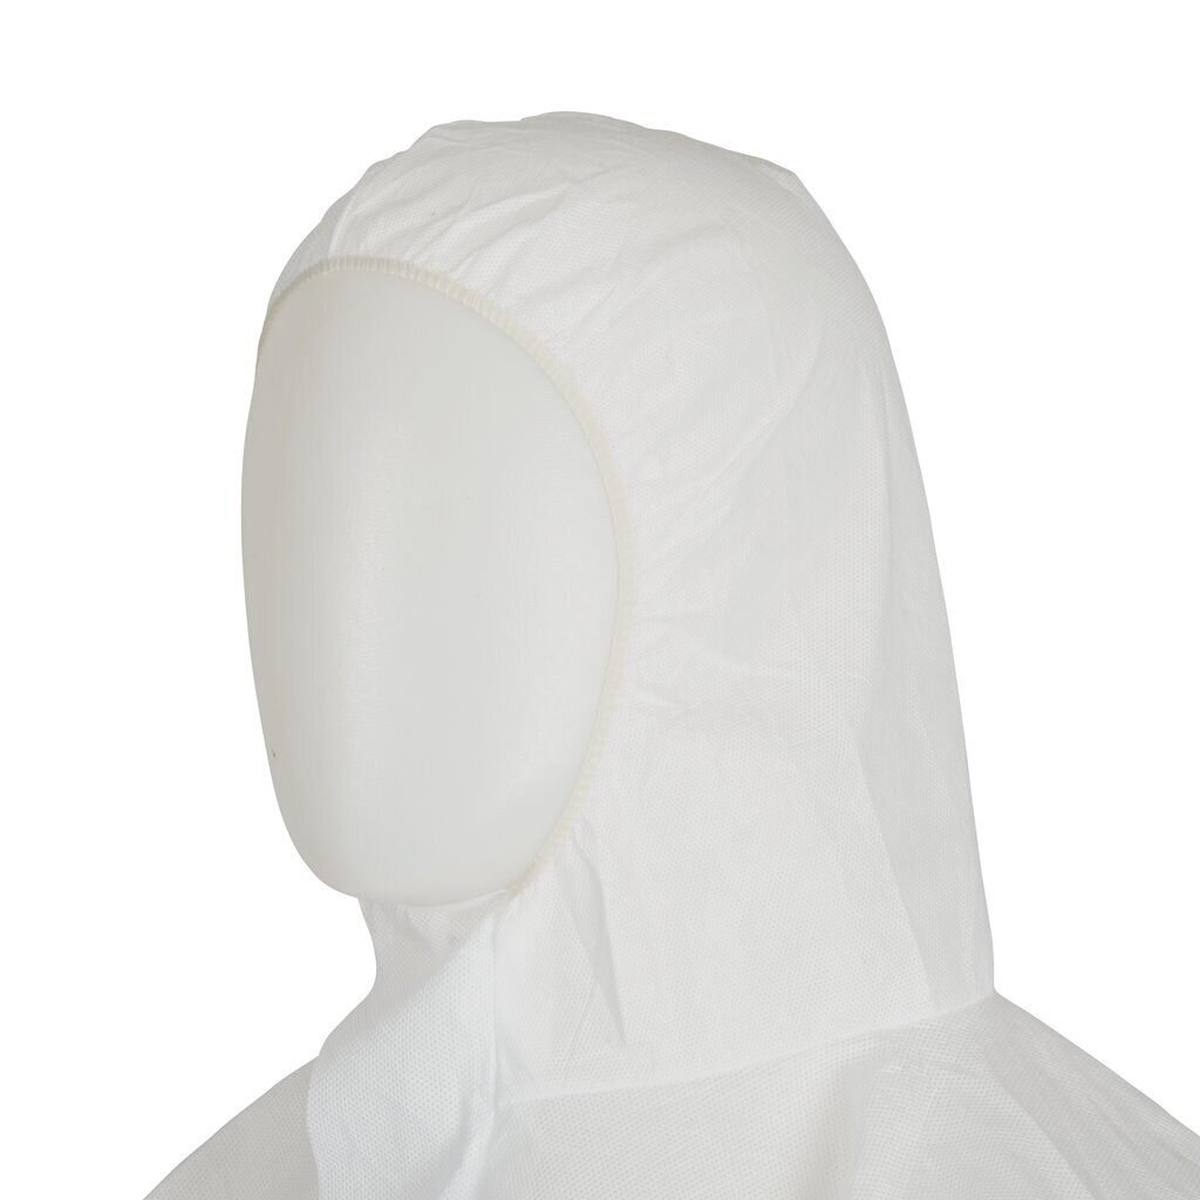 3M 4515W Protective suit, white, TYPE 5/6, size 4XL, material SMMS low-lint, elasticated cuffs